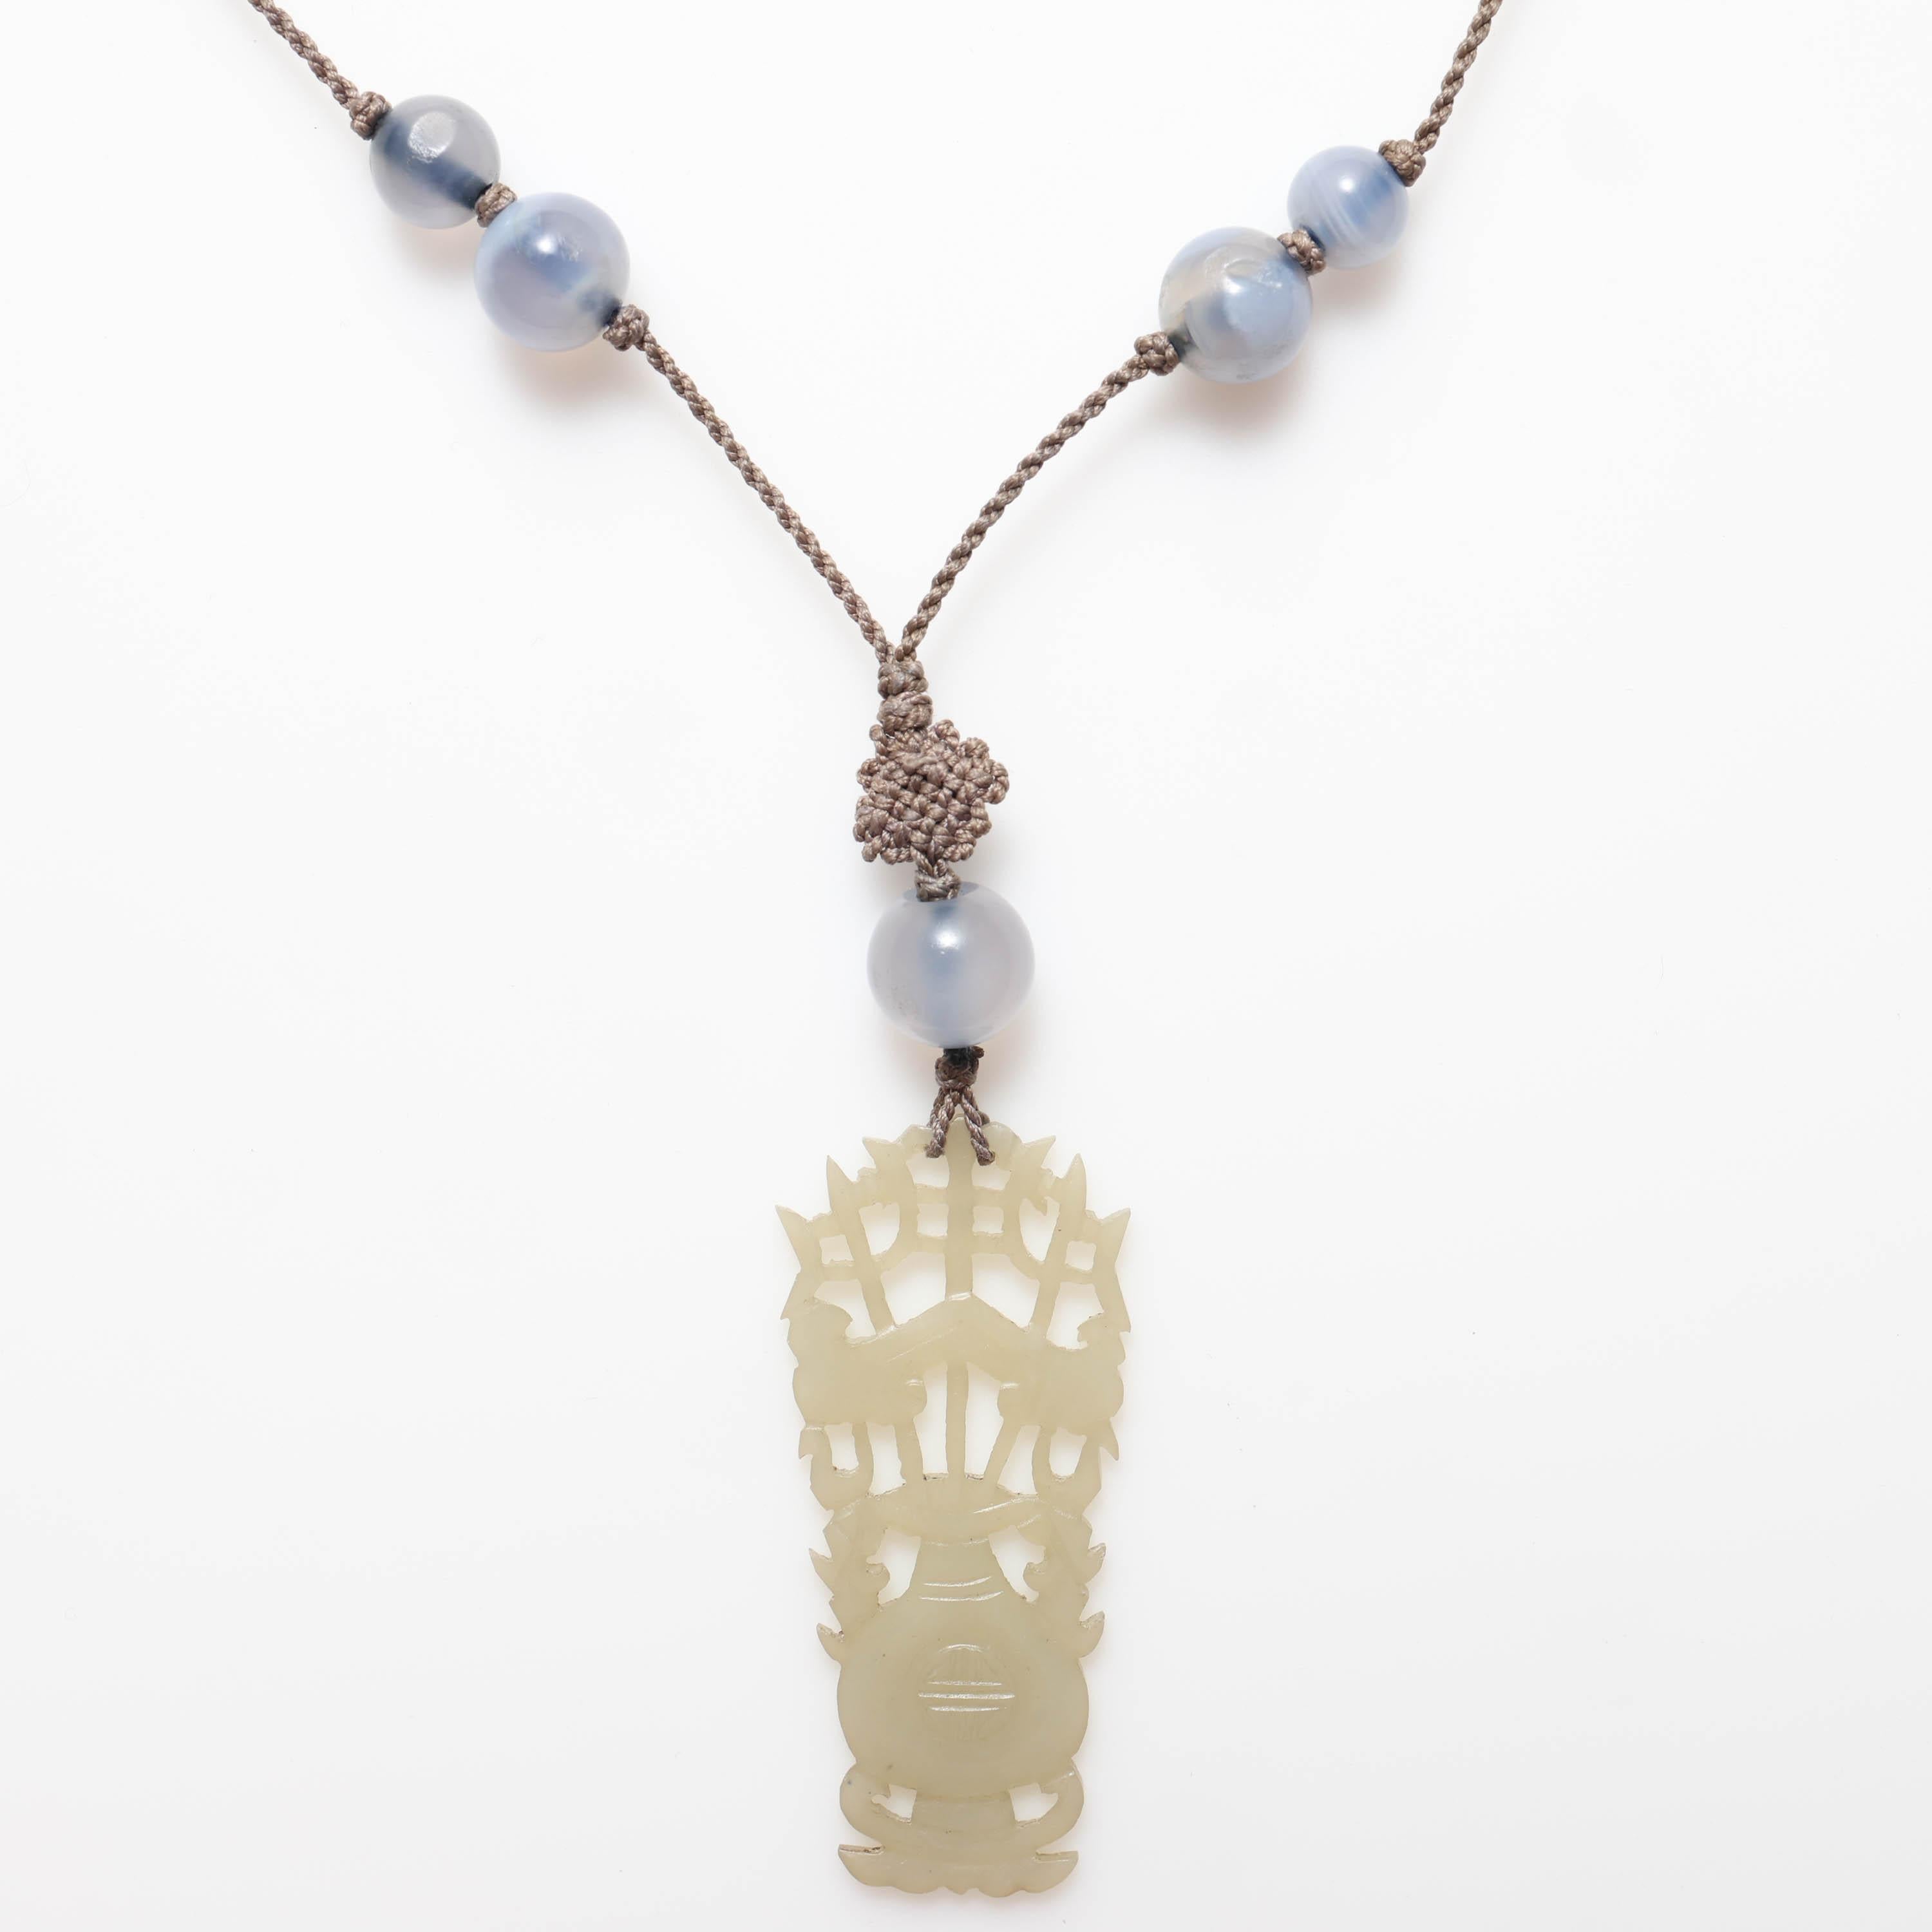 This is a rare and wholly original carved & pierced nephrite necklace from the 1920s. Still strung on its original silk and embellished with knots, rock crystal quartz, and natural blue agate. This flapper-era treasure is a creation of spectacular